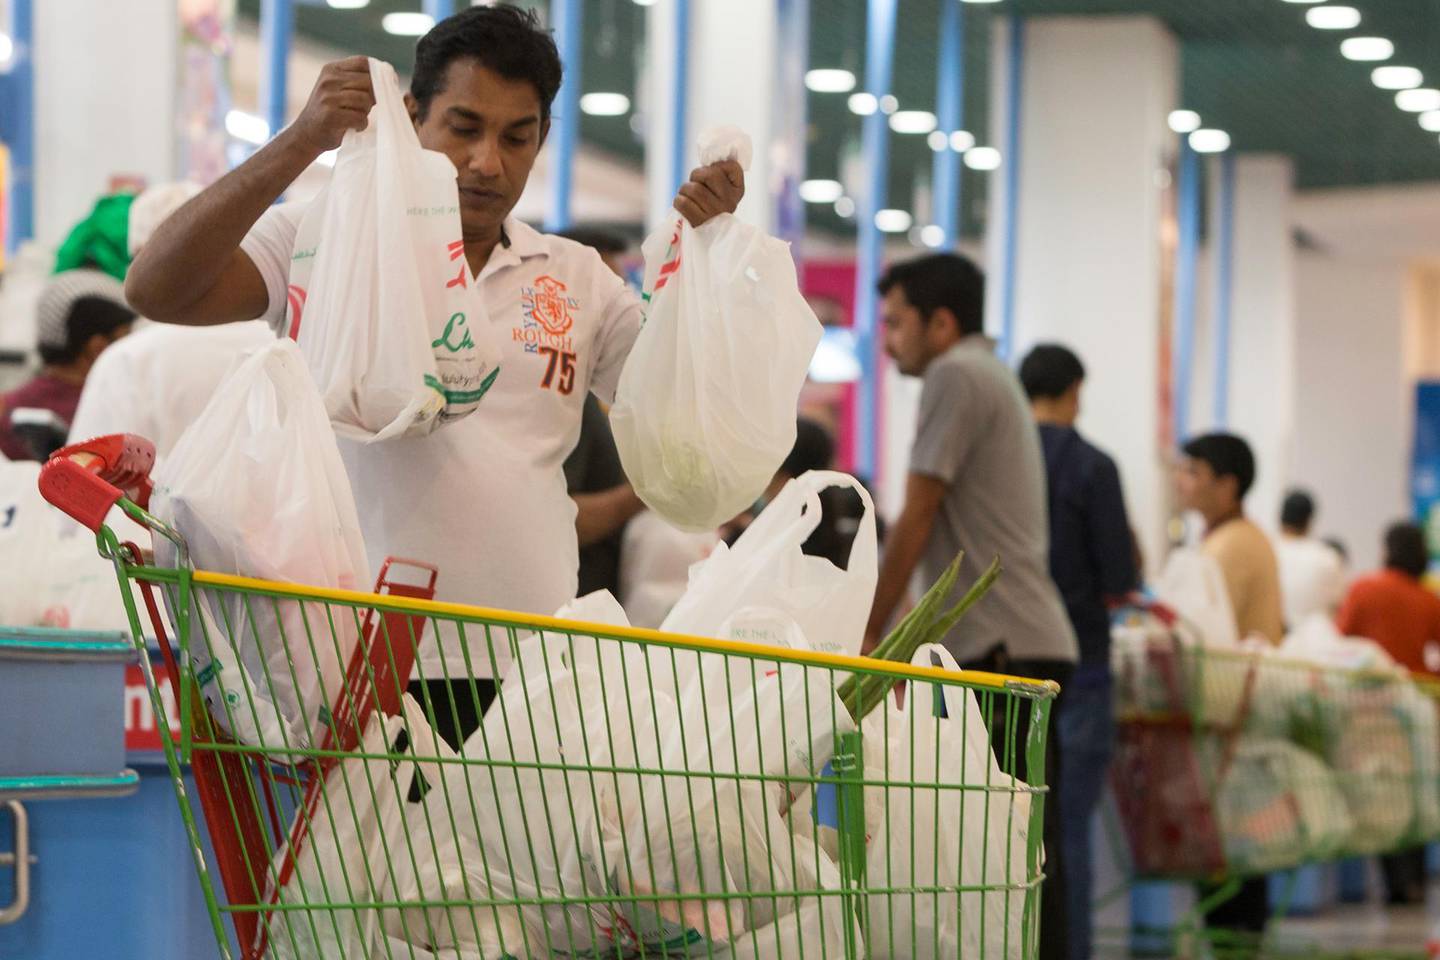 Dubai, United Arab Emirates, March 24, 2017:     General view of shoppers at the Lulu Hypermarket in the Al Barsha area of Dubai on March 24, 2017. Christopher Pike / The National

Job ID: 15607
Reporter:  N/A
Section: News
Keywords: VAT, tax, retail, customer, shop, shopping, grocery, cosmetics, clothes, jewelry, value, bags,  *** Local Caption ***  CP0324-na-VAT-25.JPG